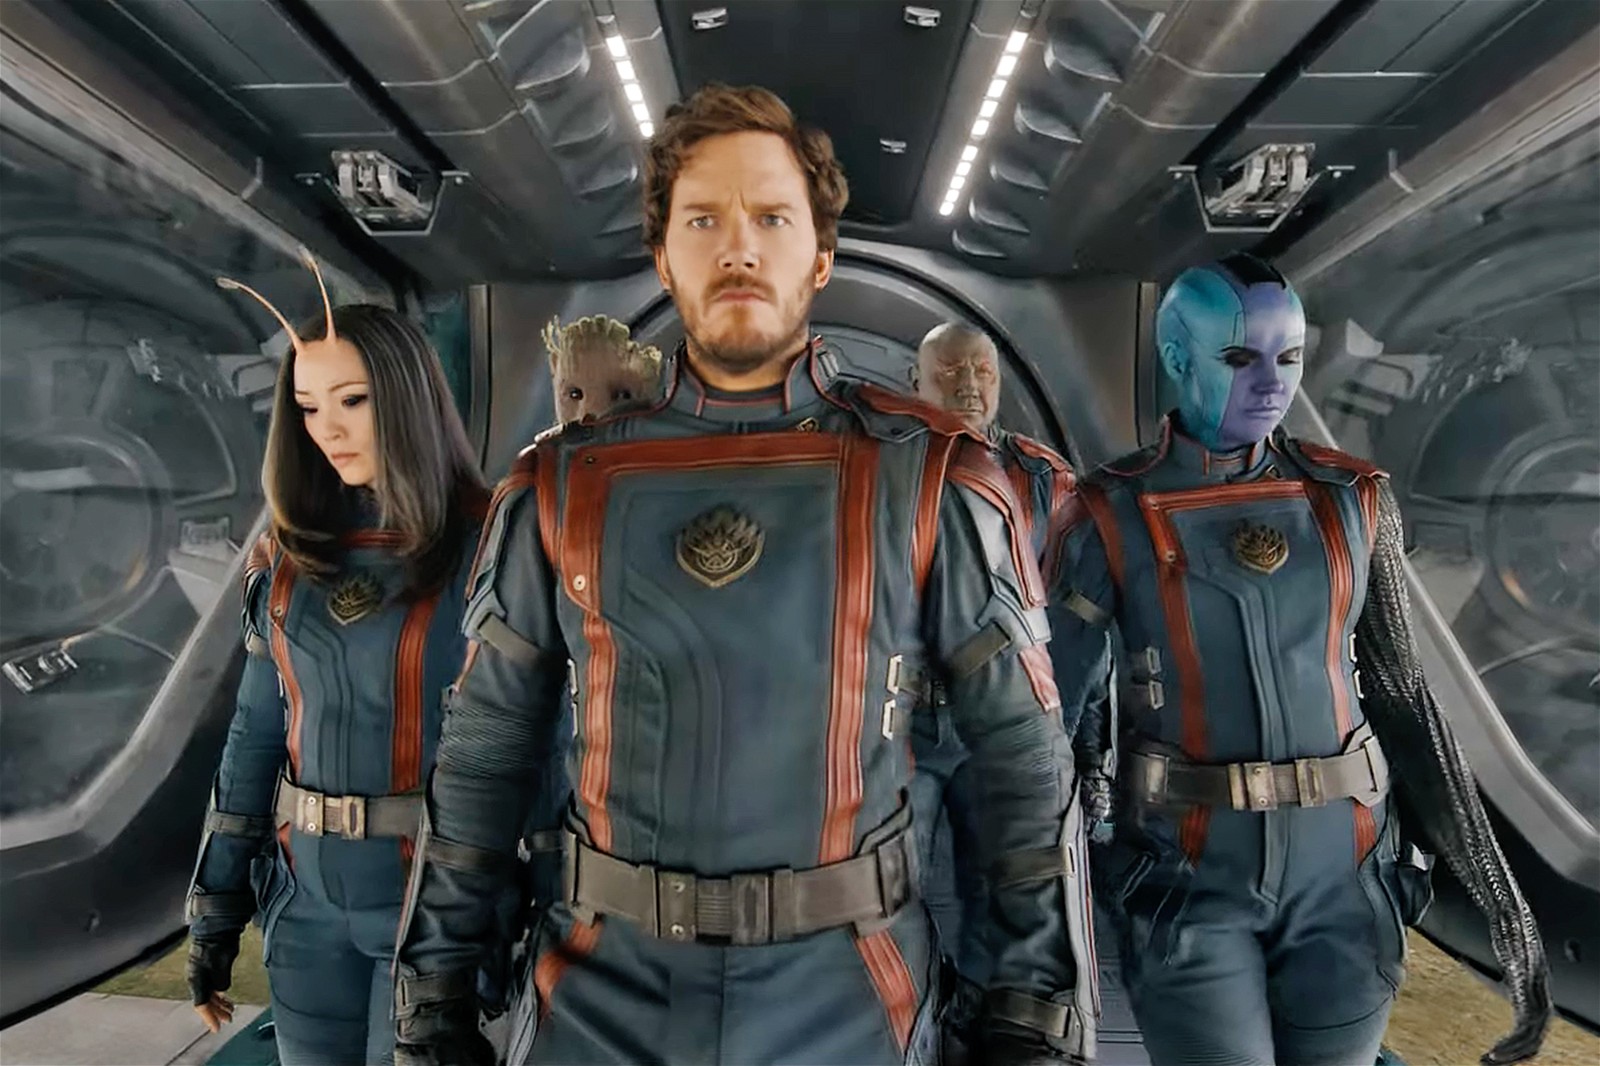 Chris Pratt in a still from the upcoming Guardians of the Galaxy Vol. 3